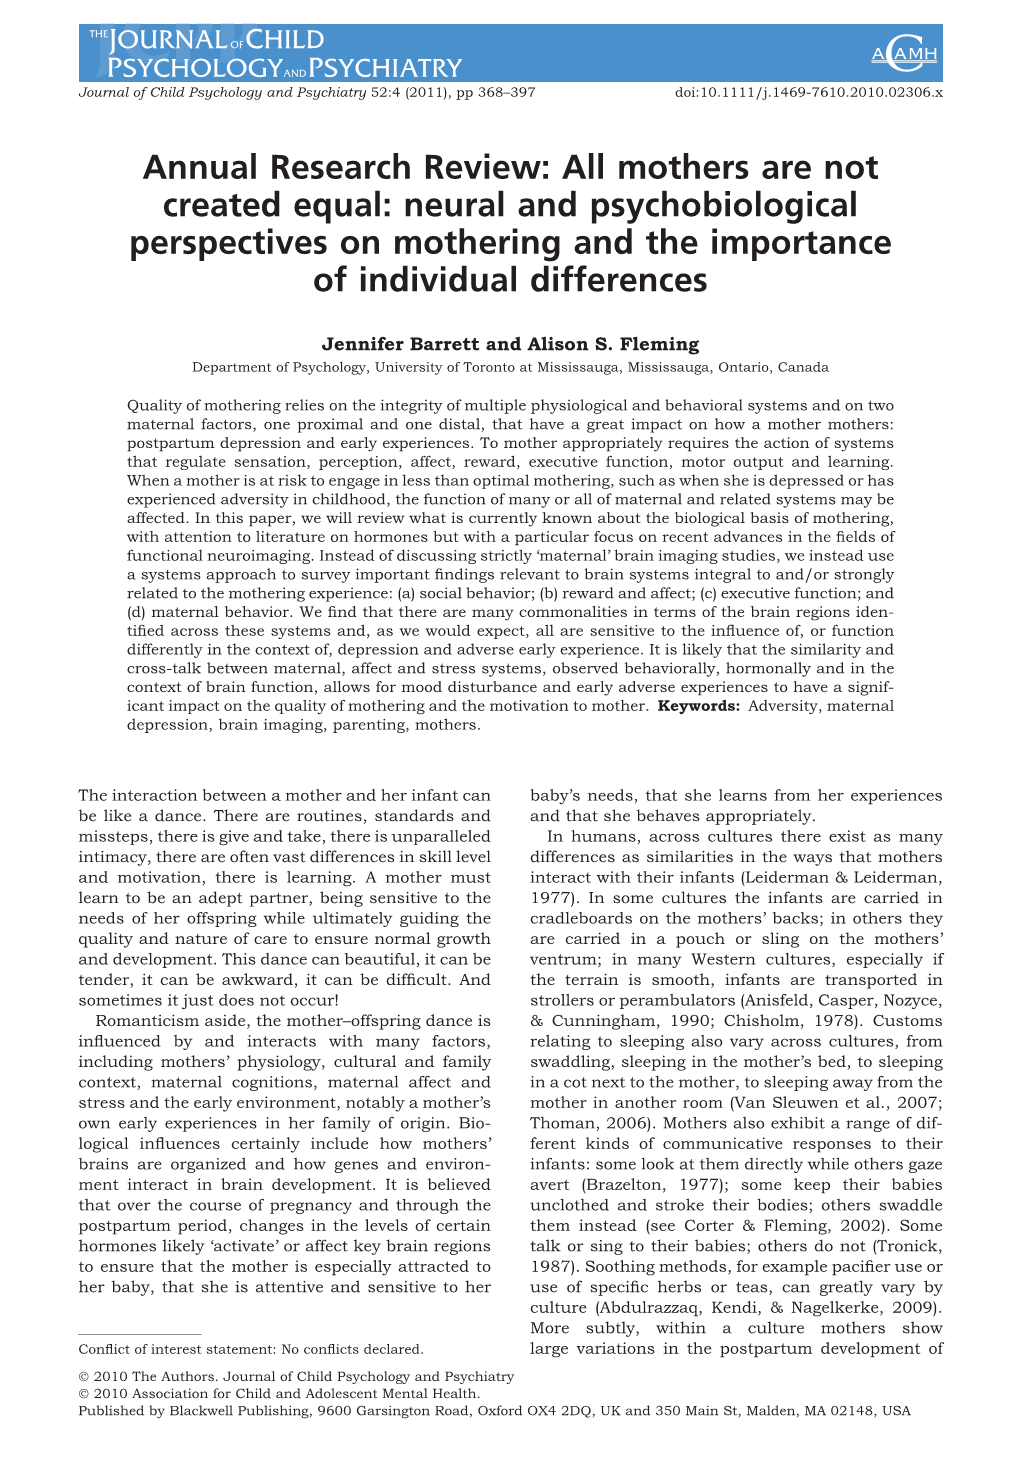 Mothers Are Not Created Equal: Neural and Psychobiological Perspectives on Mothering and the Importance of Individual Differences